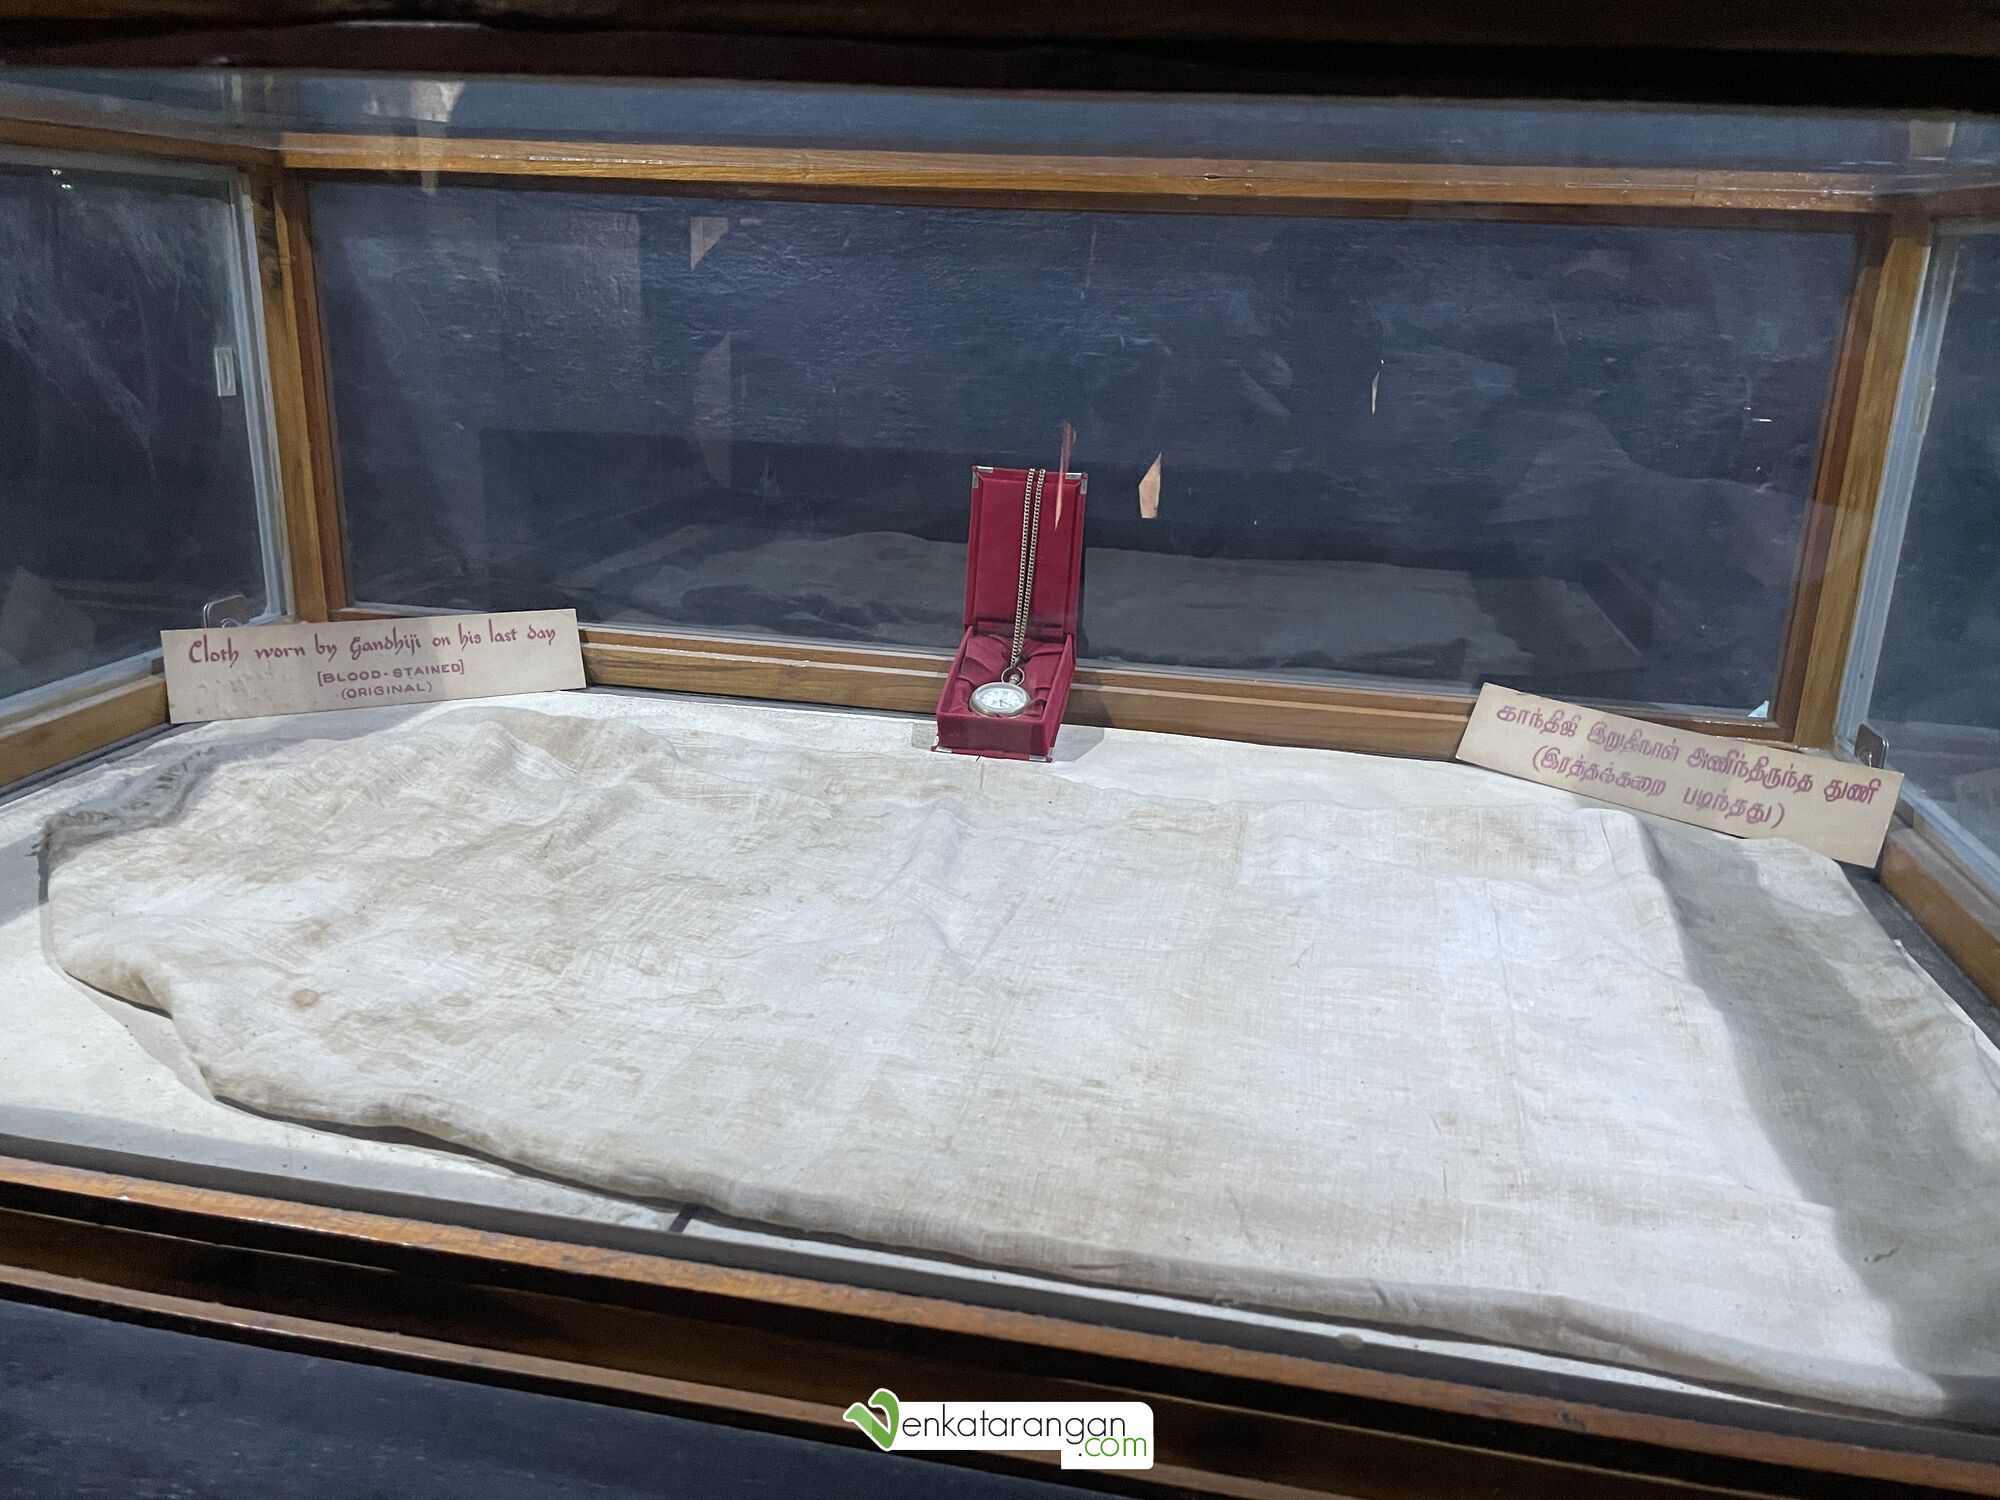 The blood-stained cloth that was worn by Gandhiji on his last day - 30 January 1948